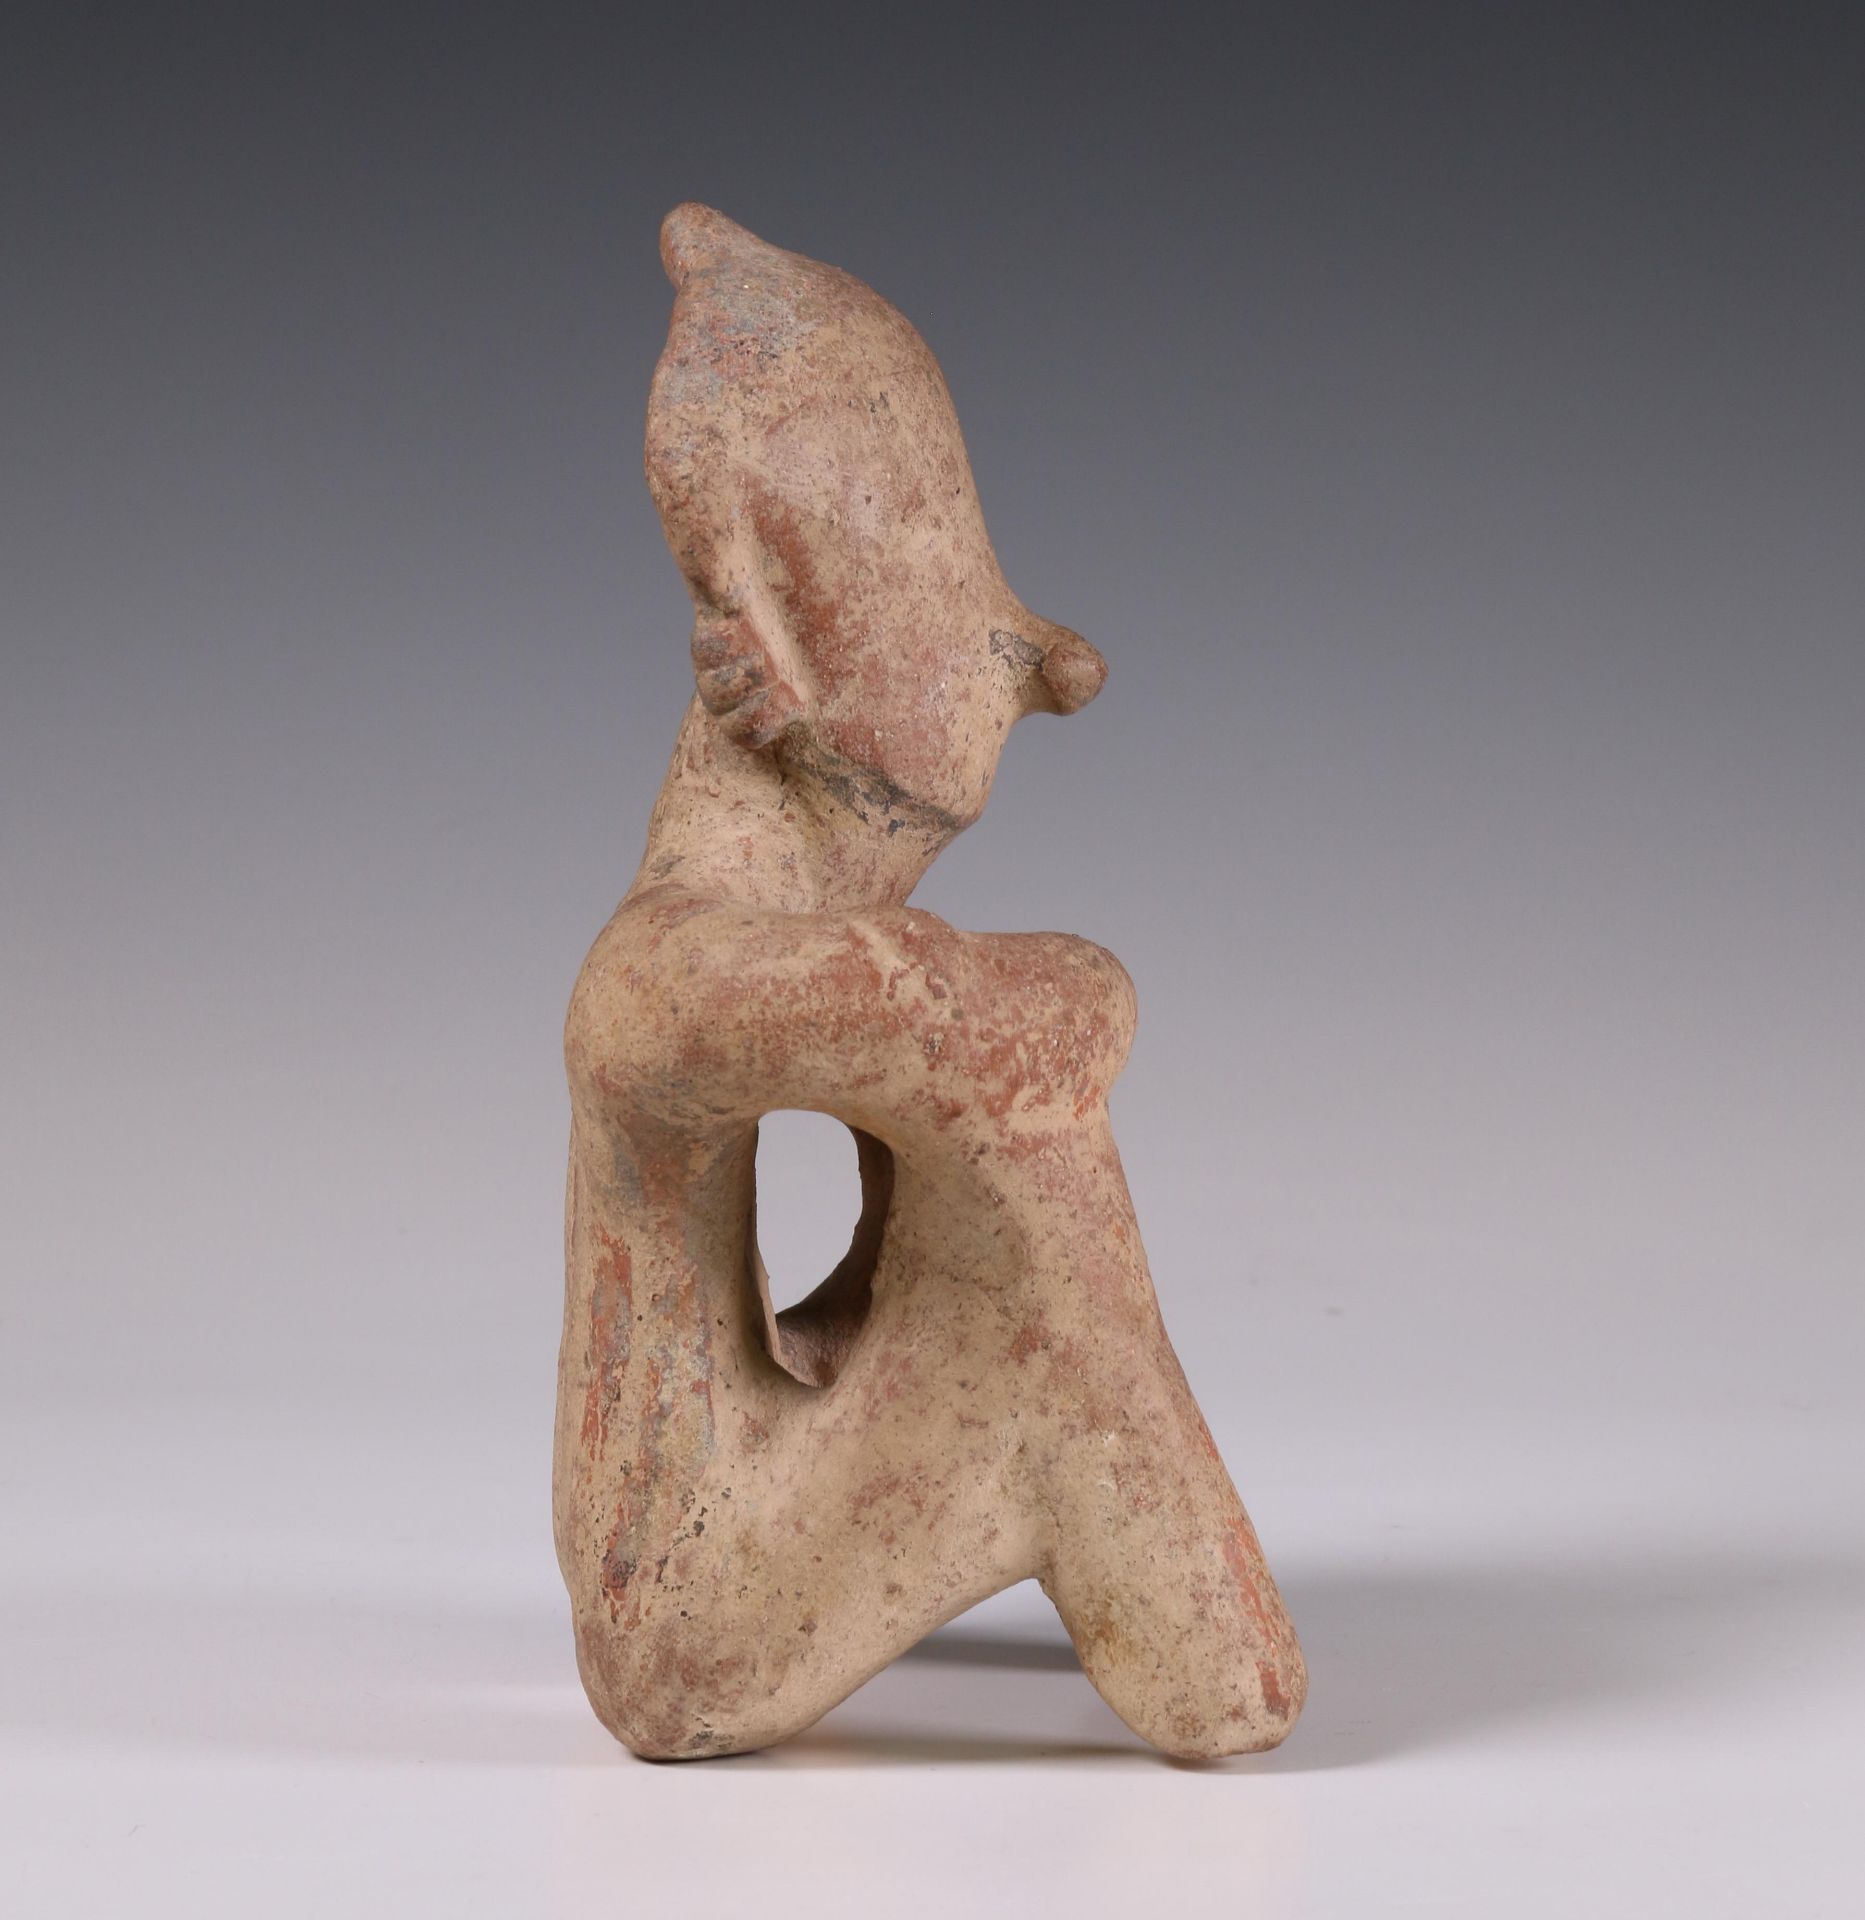 West-Mexico, Nayarit, terracotta seated figure with crossed arms in Chinesco style, 200 BC - 100 AD. - Image 6 of 7